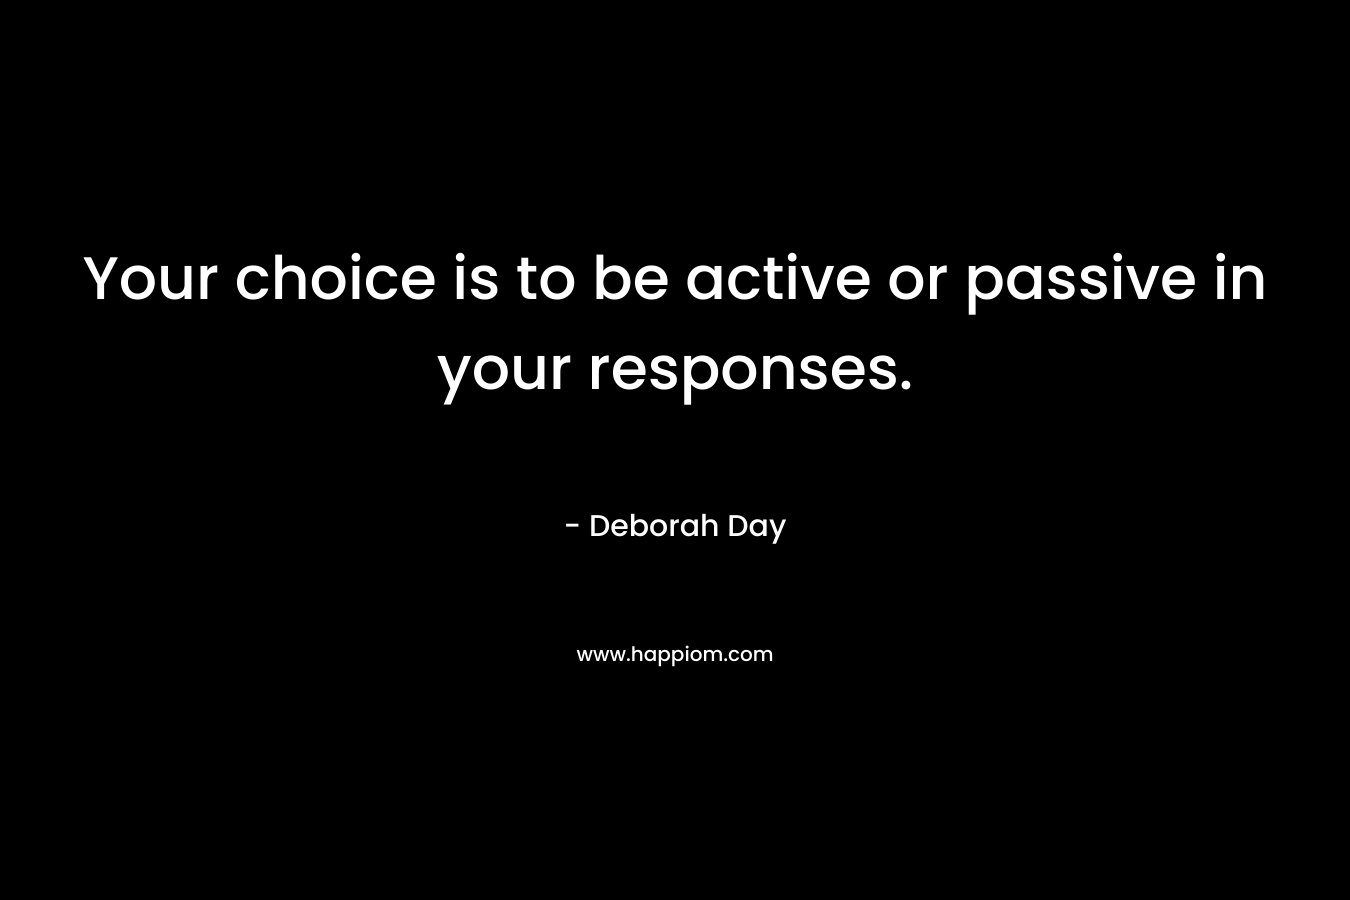 Your choice is to be active or passive in your responses.